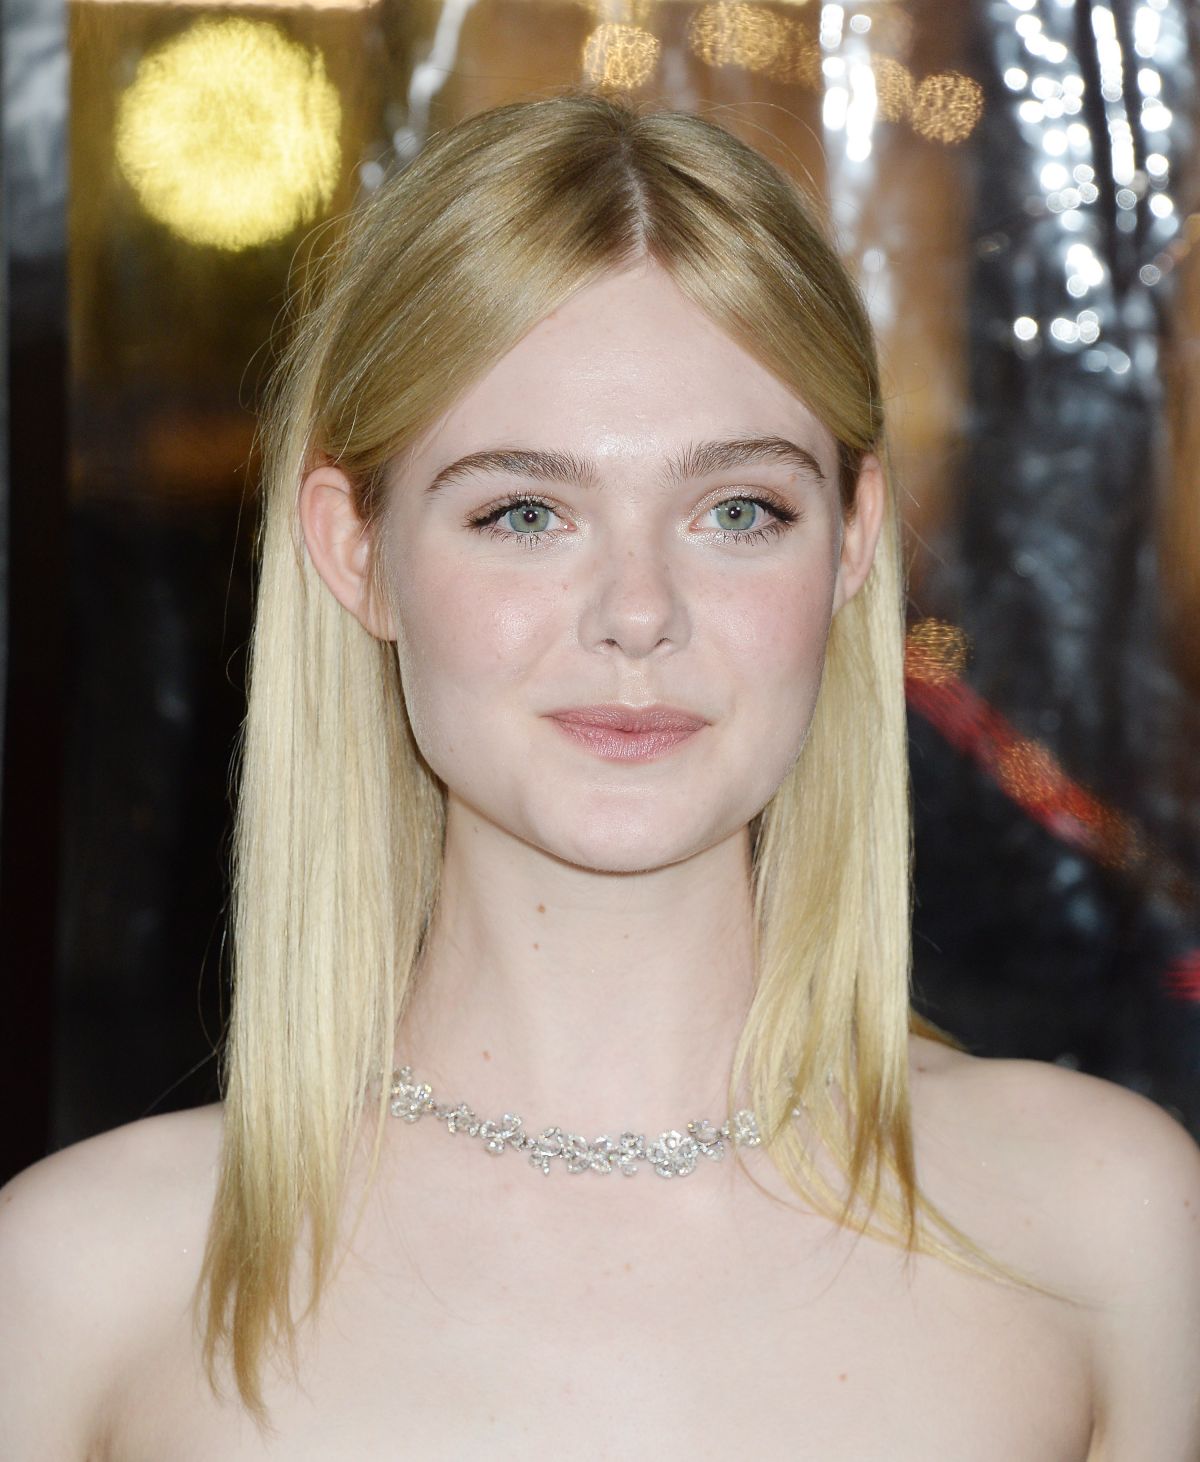 elle-fanning-at-live-by-night-premiere-in-hollywood-01-09-2017_7.